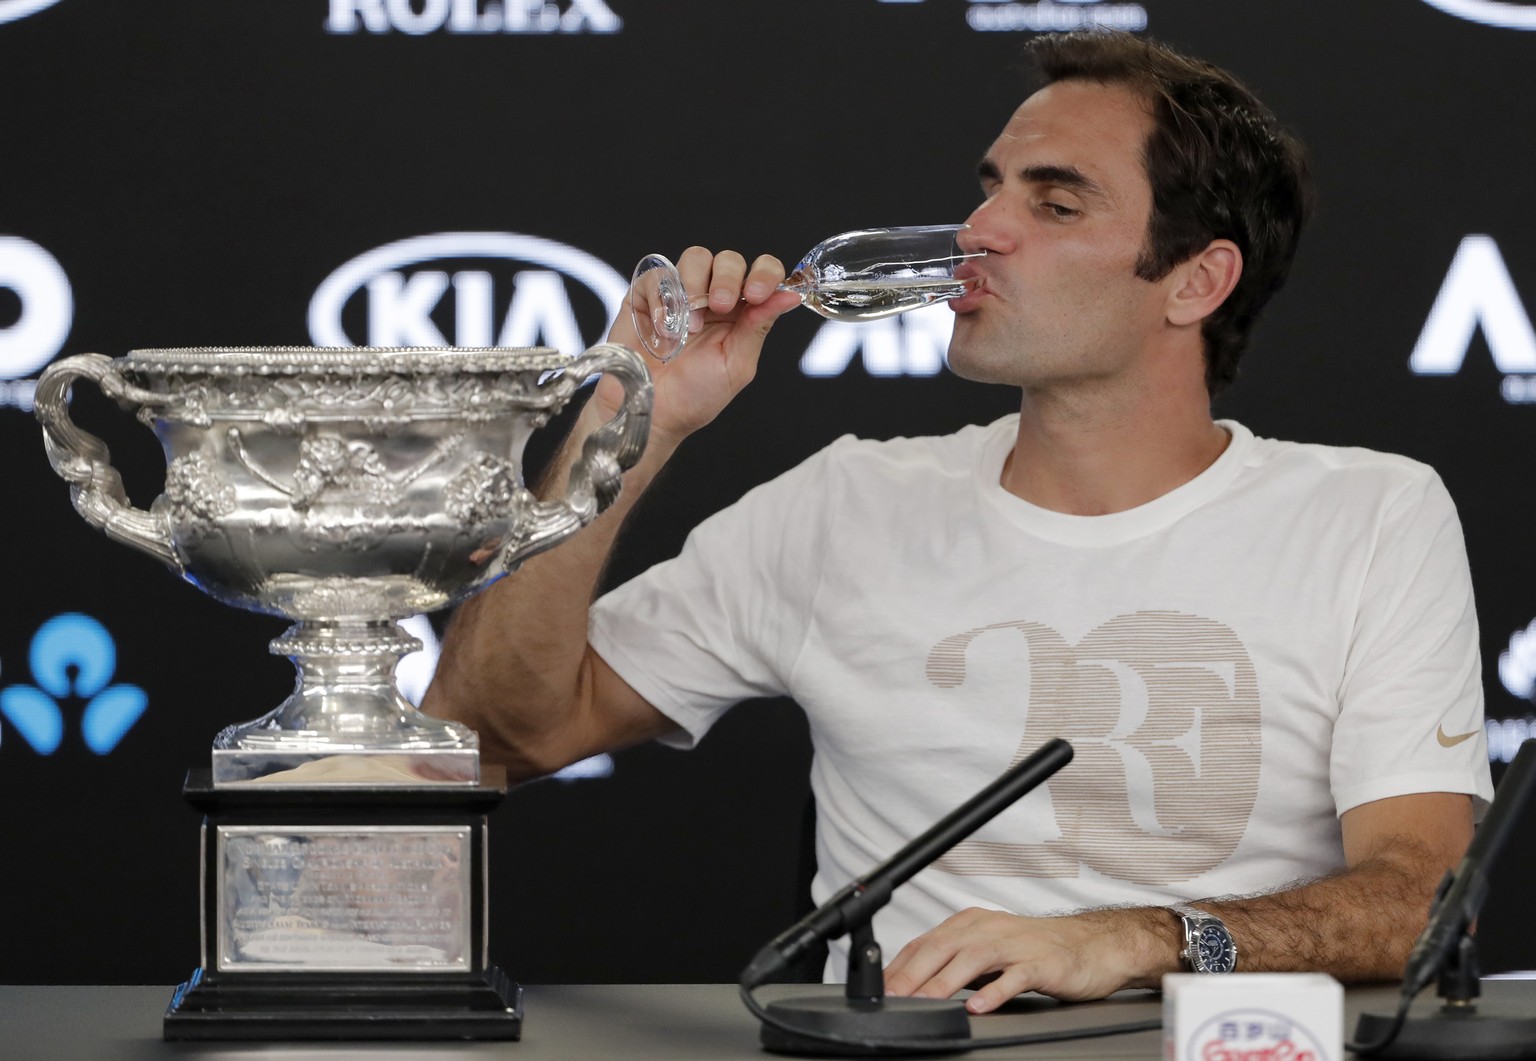 Switzerland&#039;s Roger Federer drinks a glass of champagne during a press conference after defeating Croatia&#039;s Marin Cilic in the men&#039;s singles final at the Australian Open tennis champion ...